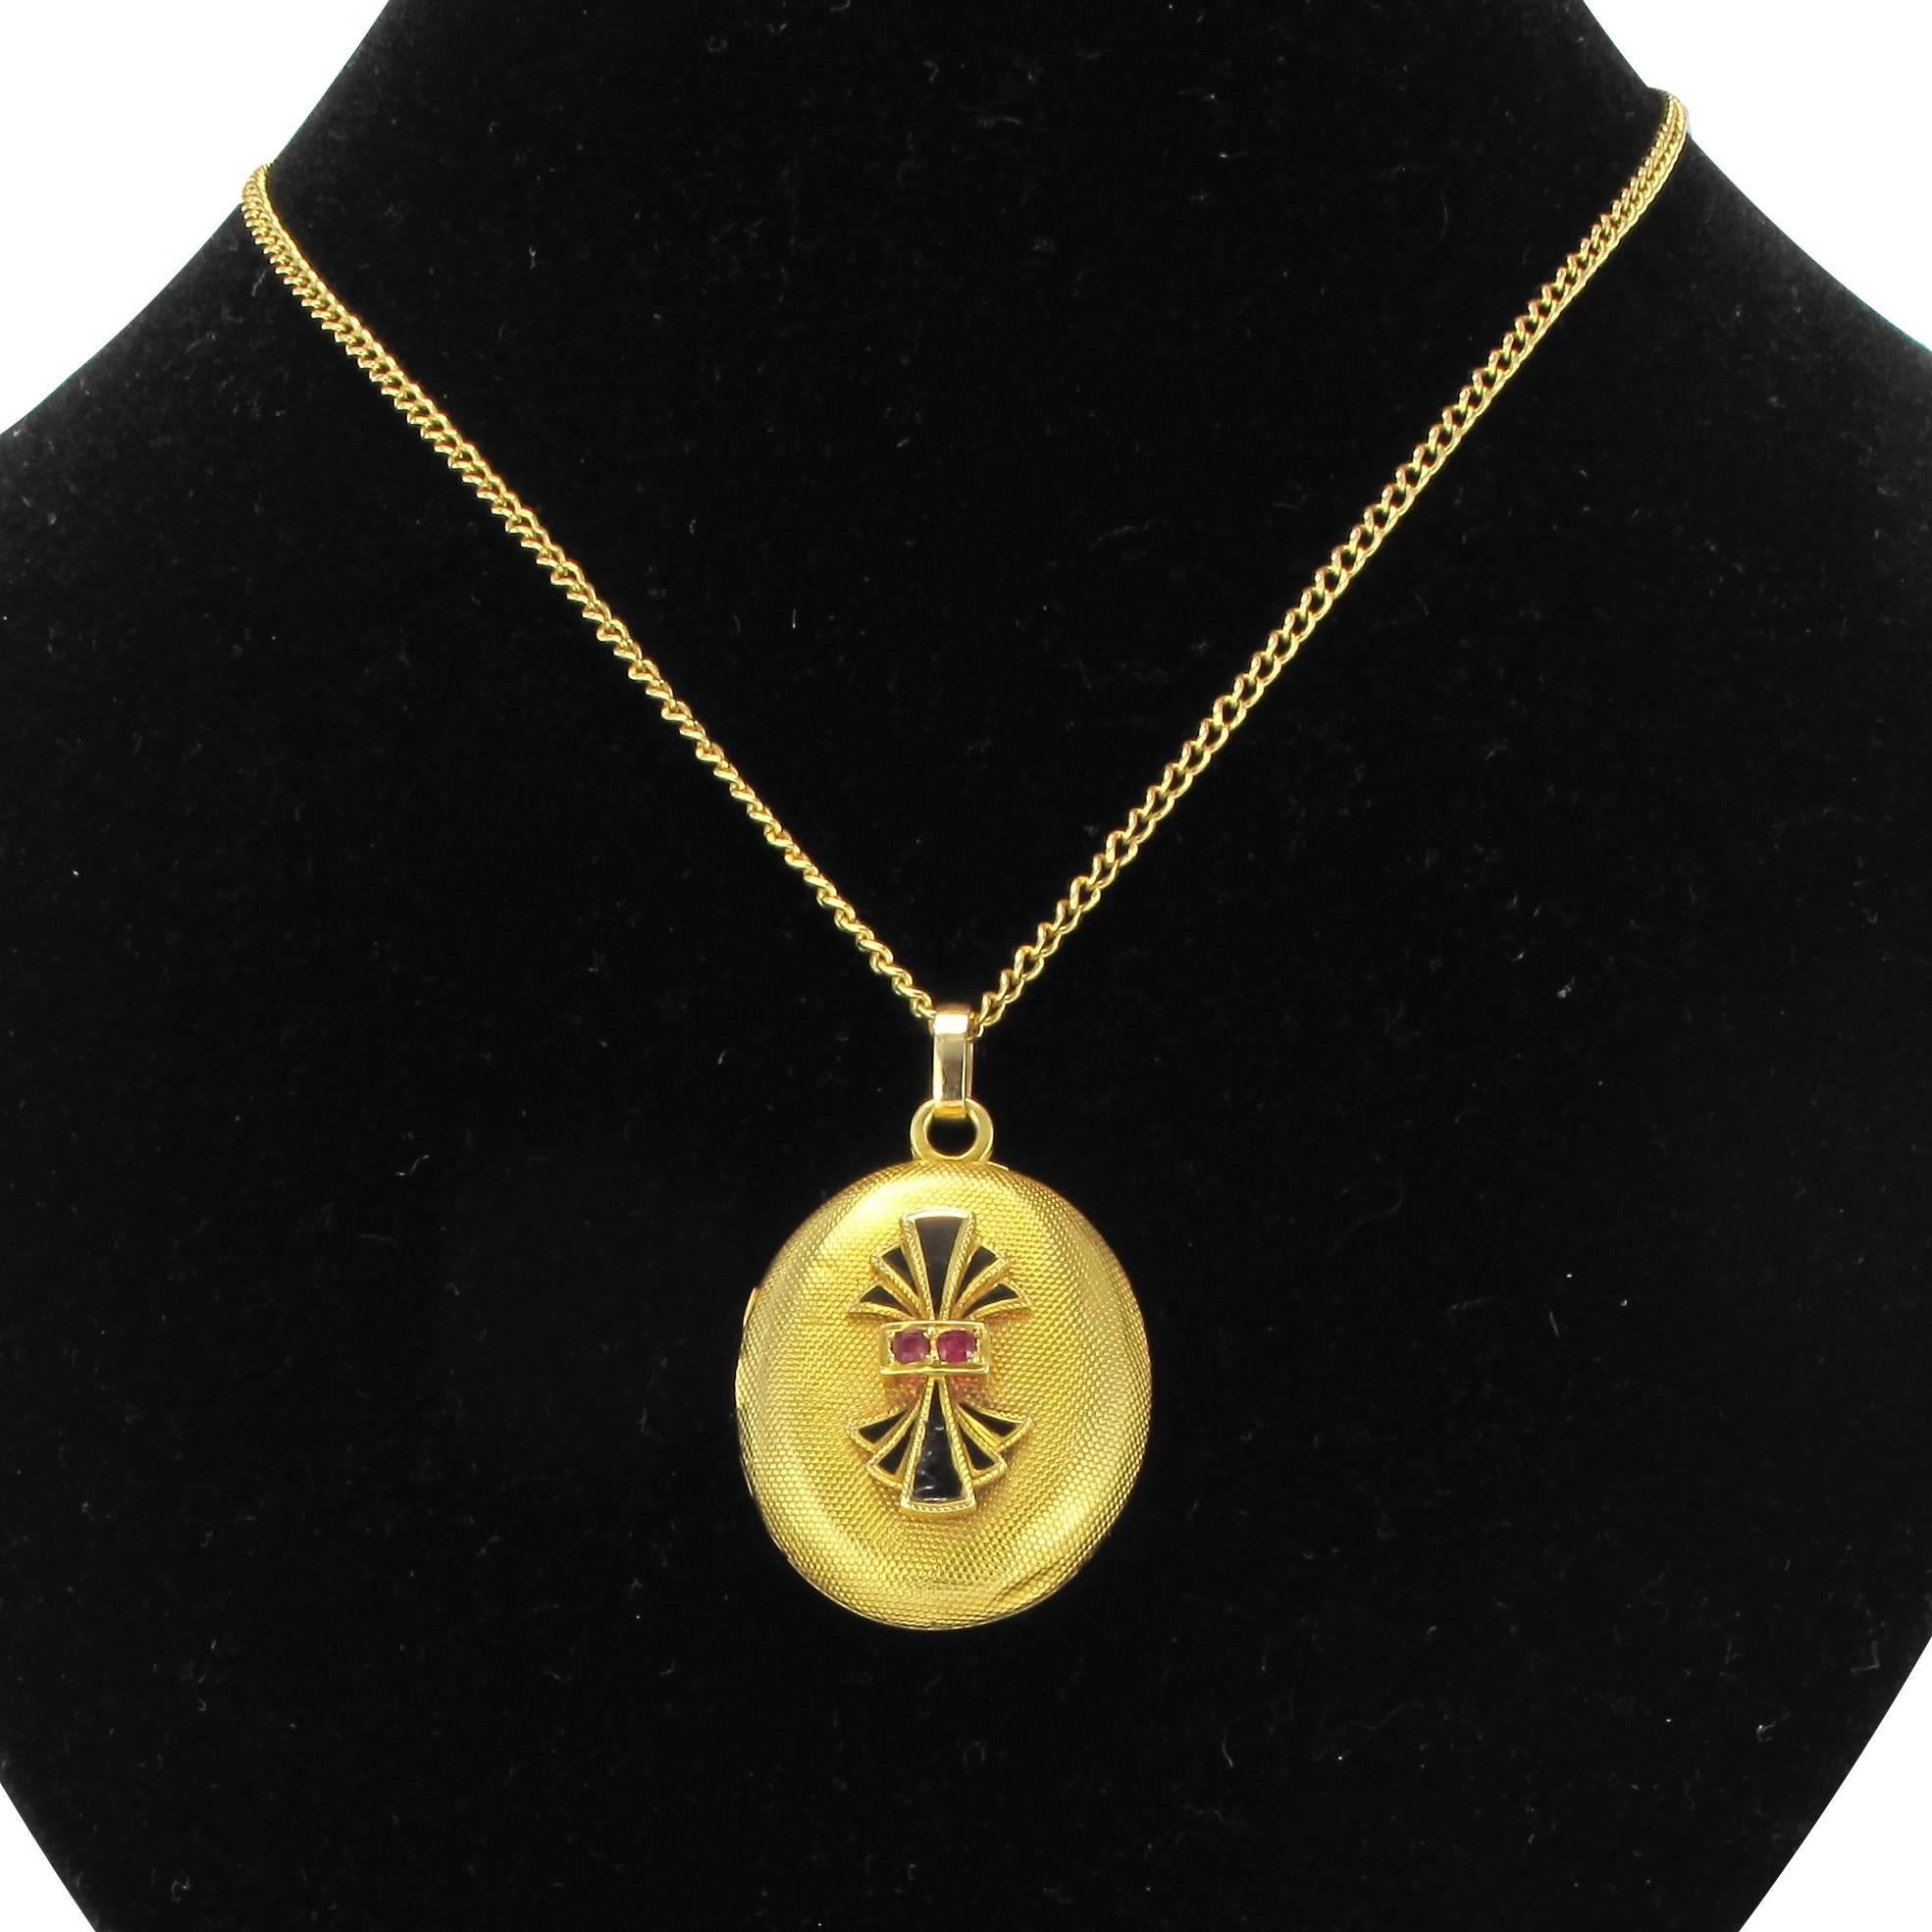 18 karat yellow gold medallion.
This antique engraved gold locket is set with a double fan design in black enamel set with 2 round rubies. The medallion locket opens with a side hinge to reveal a crystal screen edged with gold to protect a small